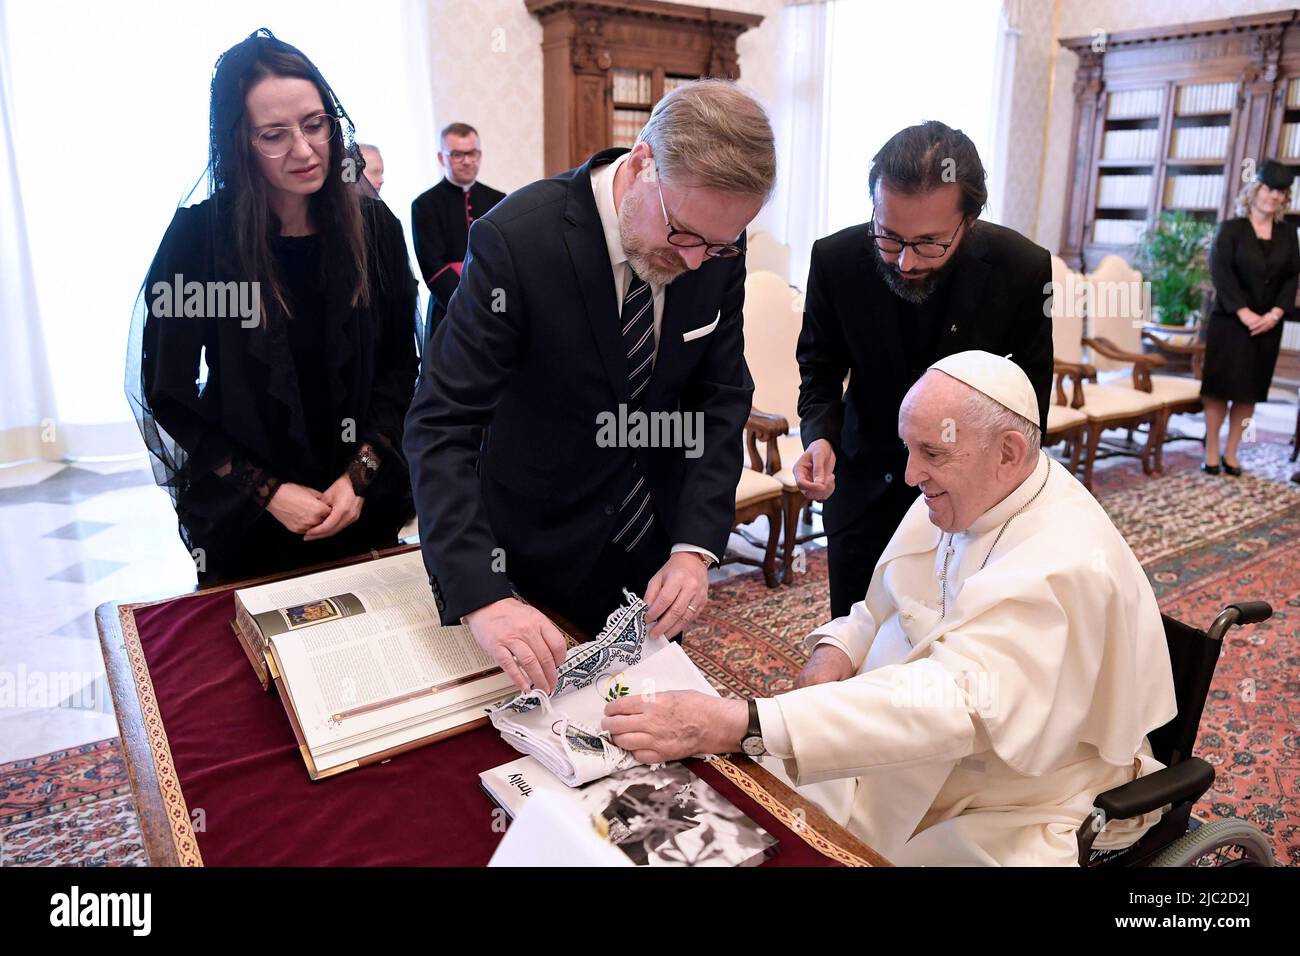 Vatican City, Vatican. 09 June 2022. Pope Francis meets Petr Fiala, Prime Minister of the Czech Republic, with his consort, during a private audience. (Photo by Vatican Media). Credit: Vatican Media/Picciarella/Alamy Live News Stock Photo